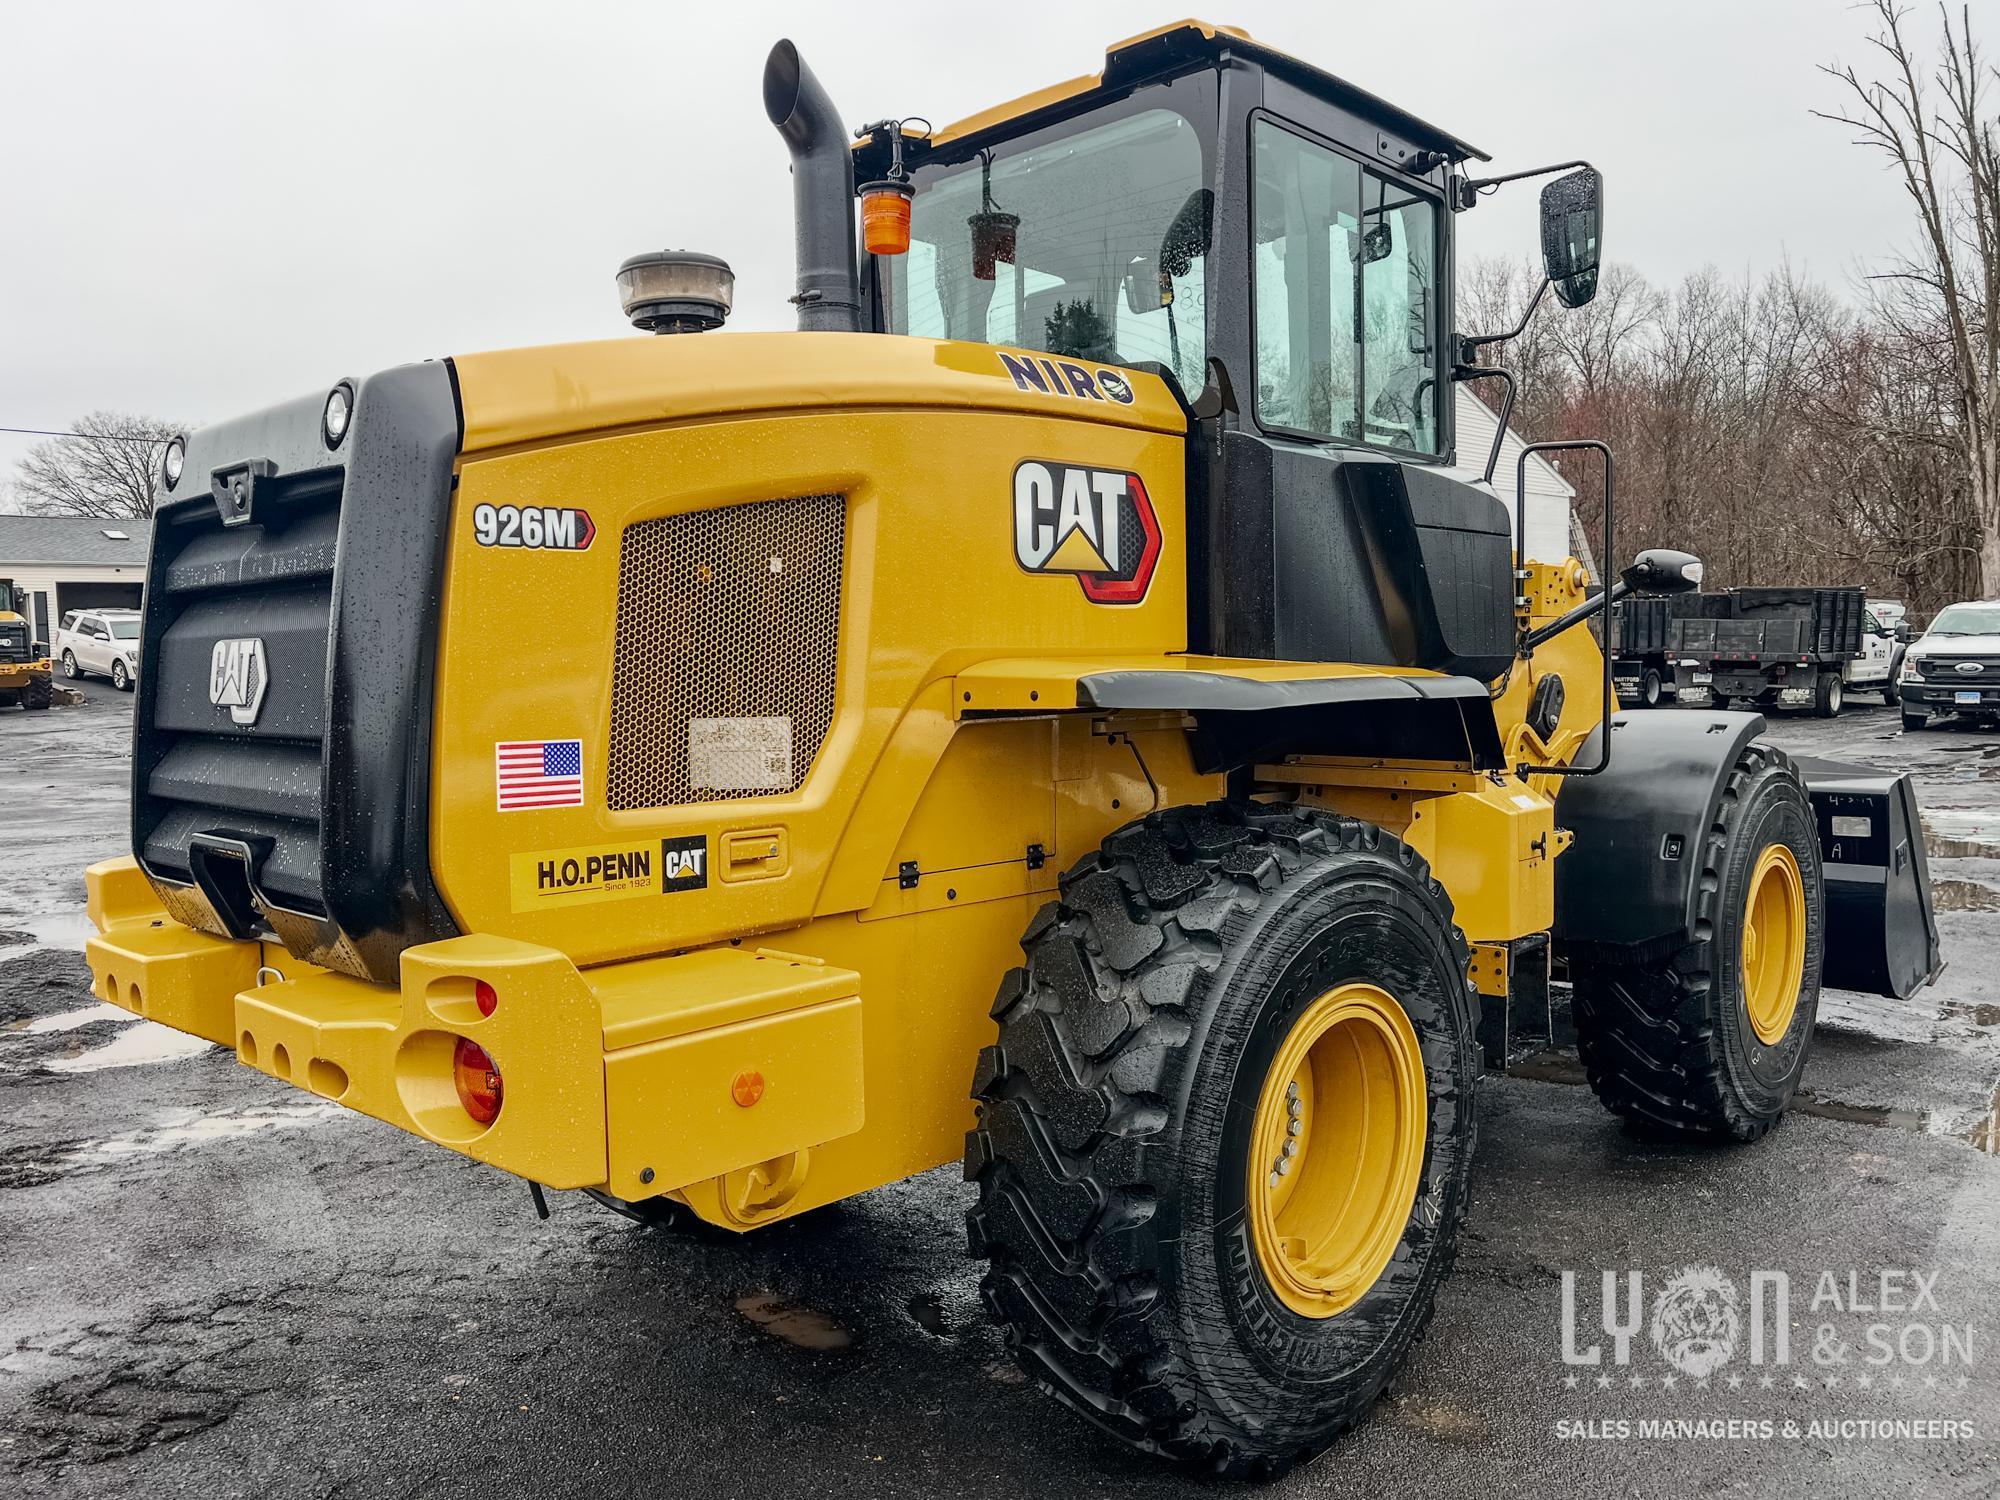 2023 CAT 926M RUBBER TIRED LOADER... SN-03443 powered by C7.1 ACERT diesel engine, 153hp, equipped